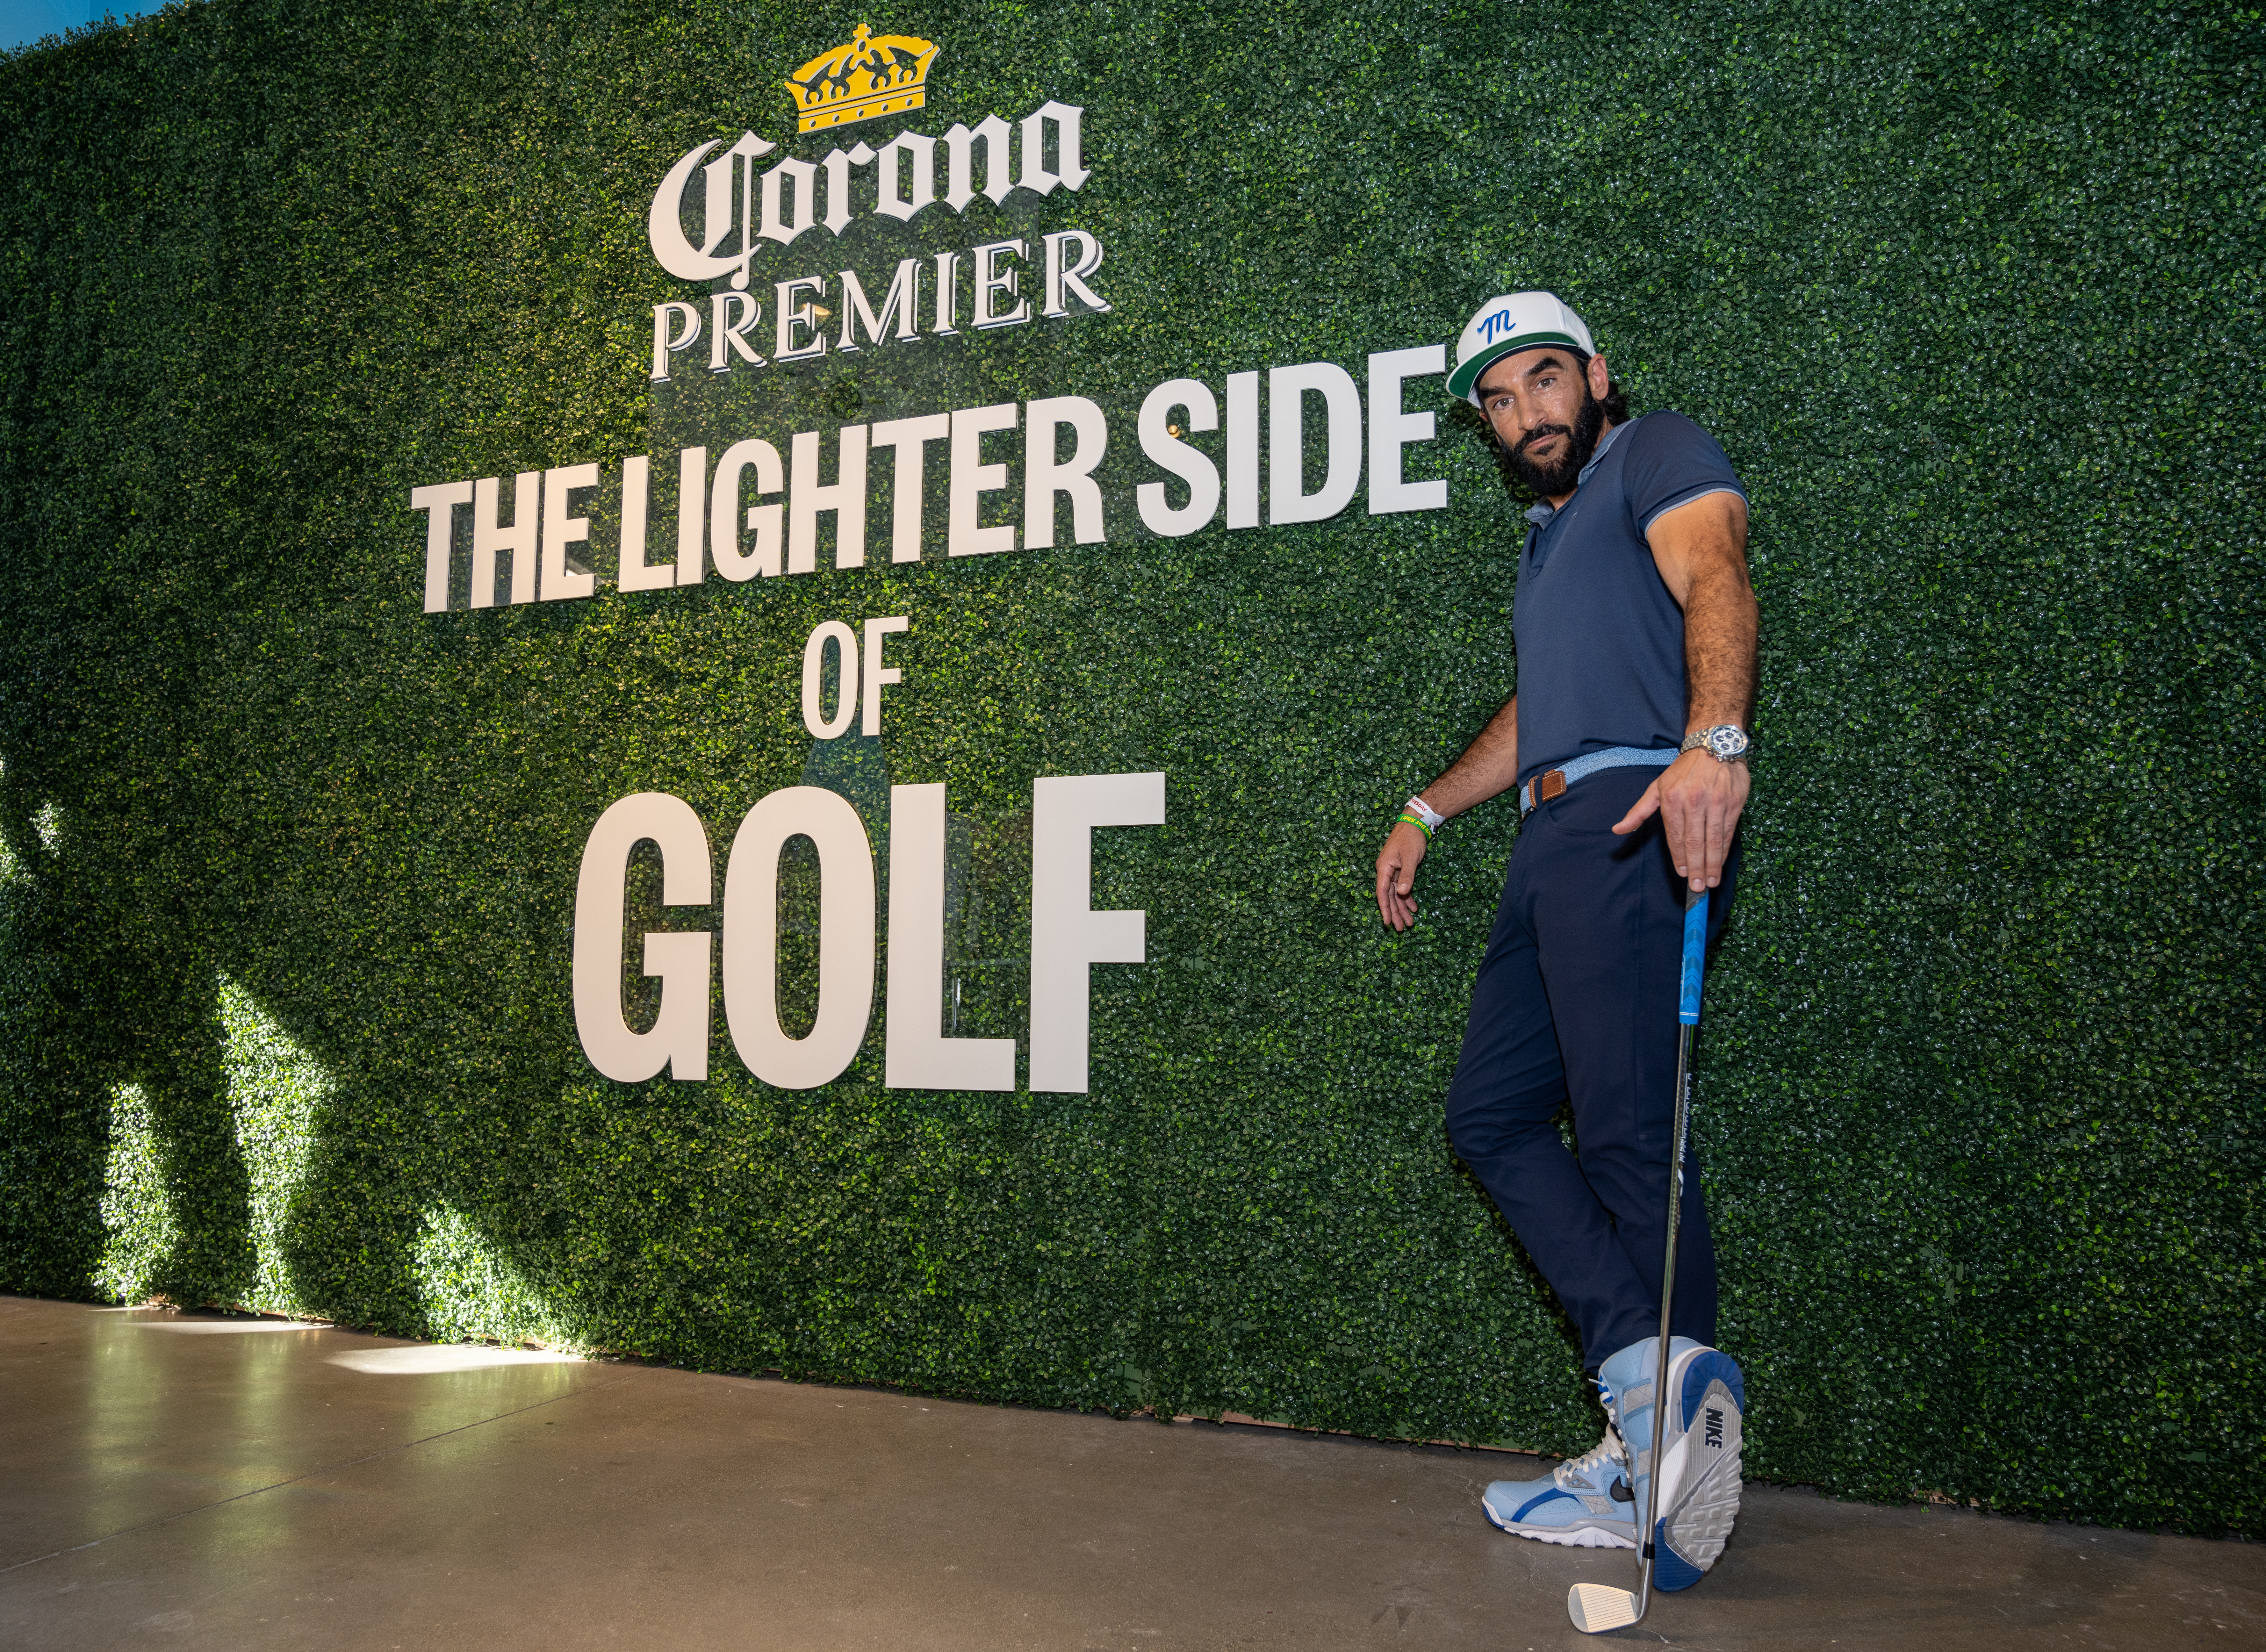 Manolo Vega at the Corona Premier Clubhouse Launch Party